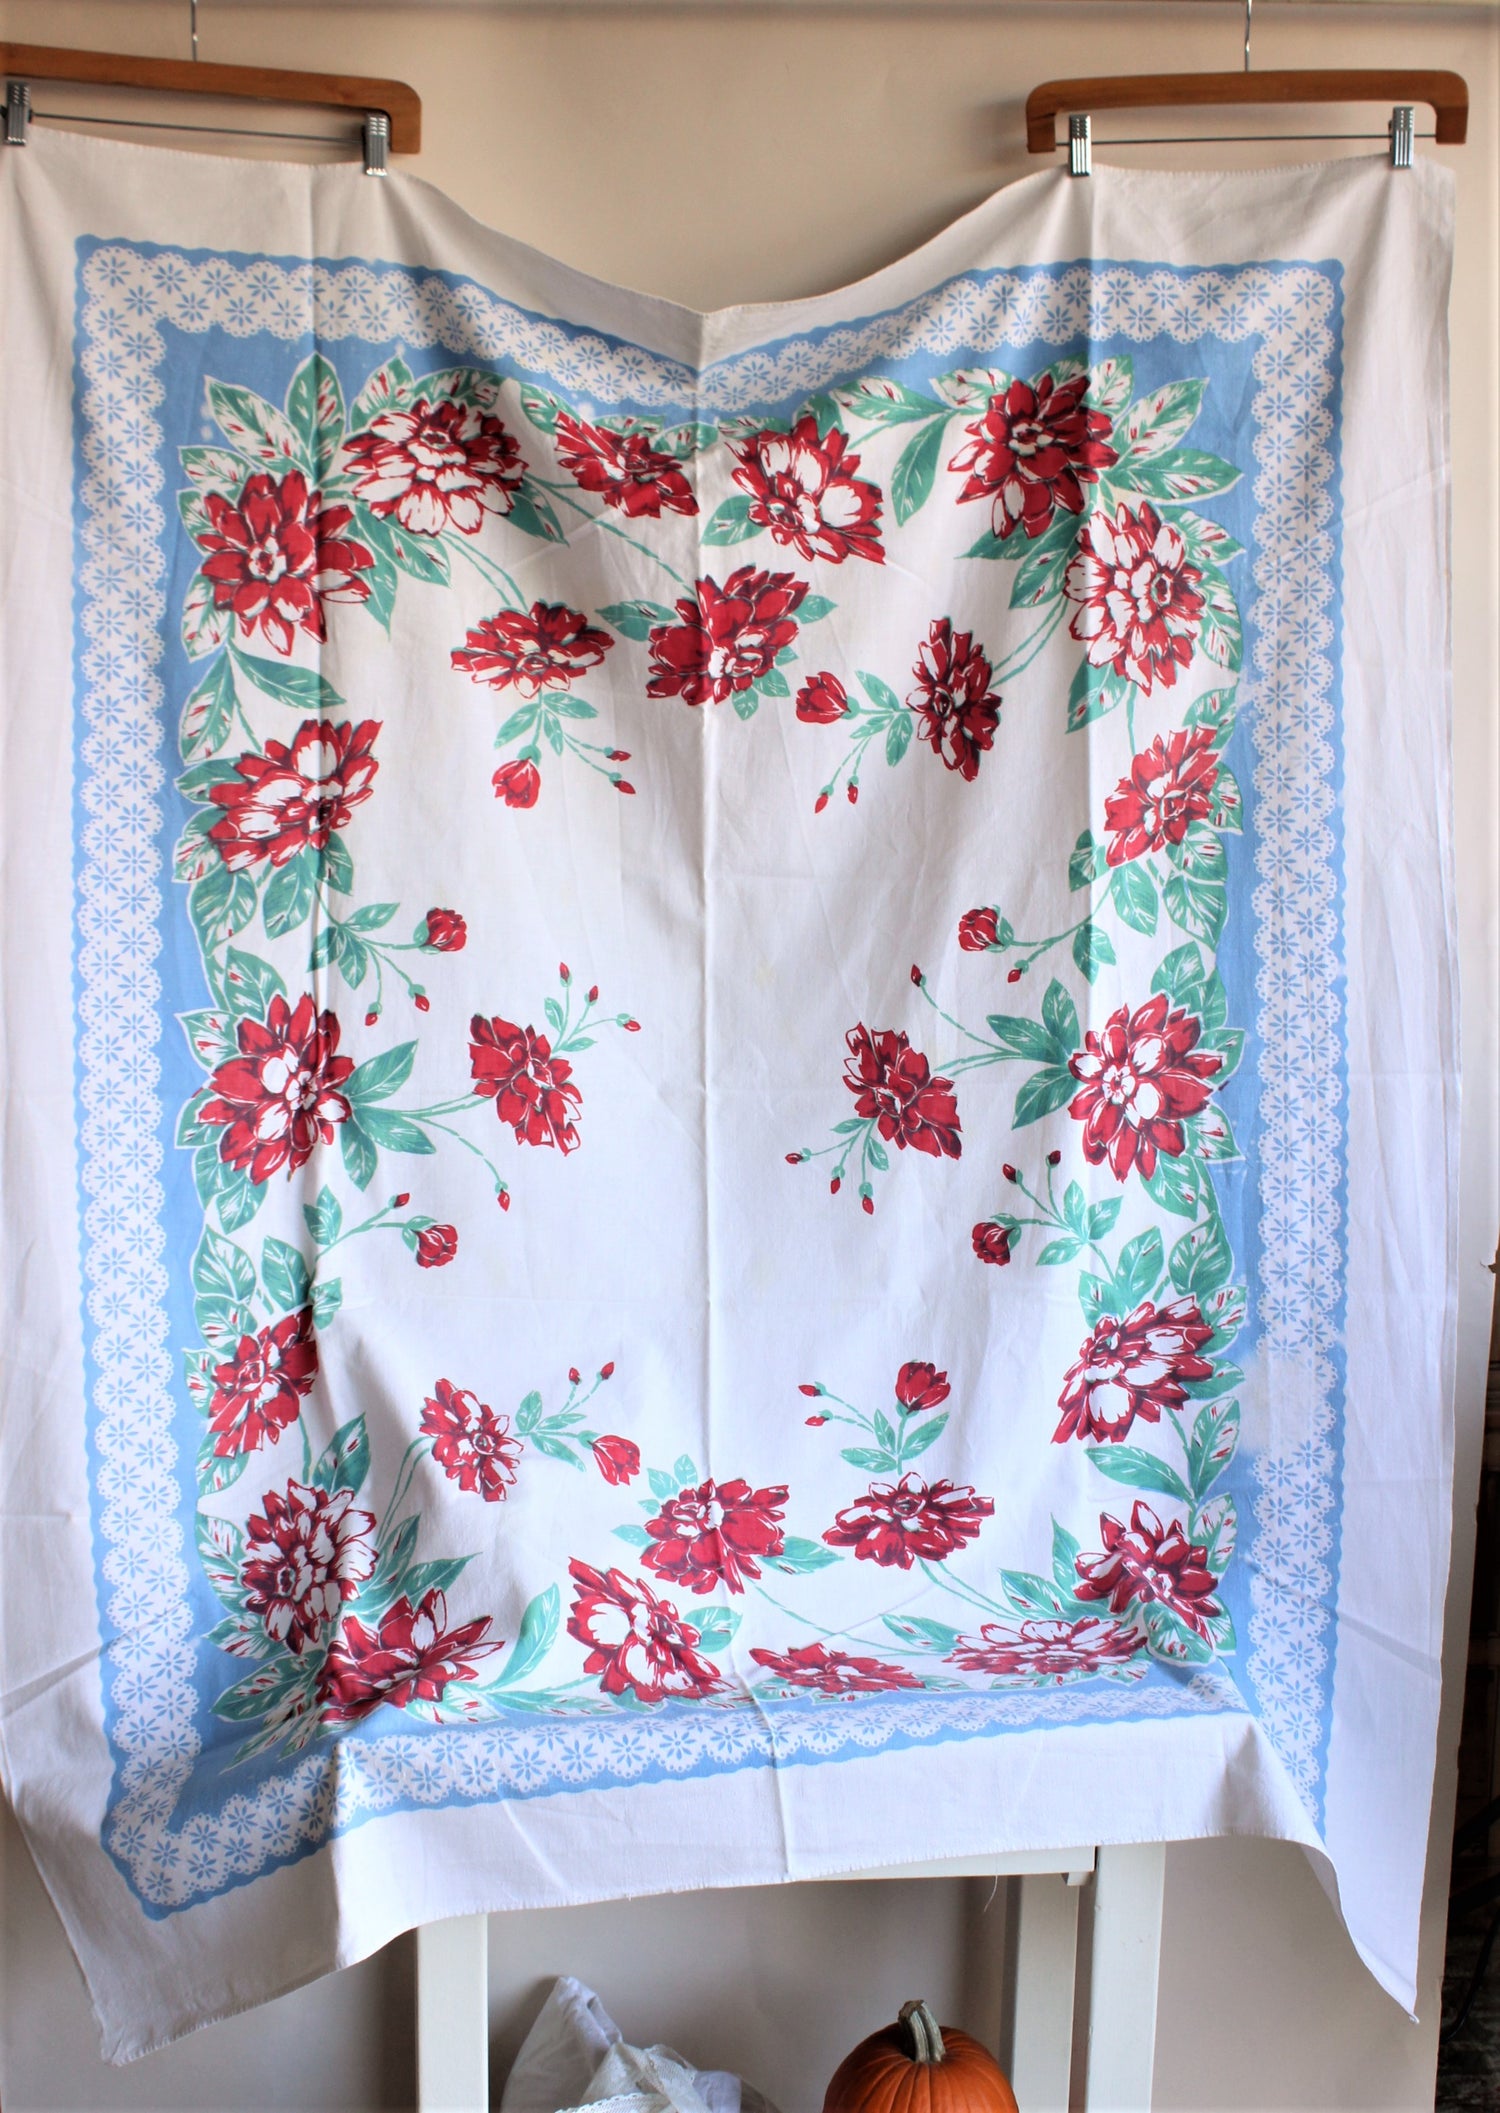 Vintage 1940s, 1950s Tablecloth with red flowers and blue borders